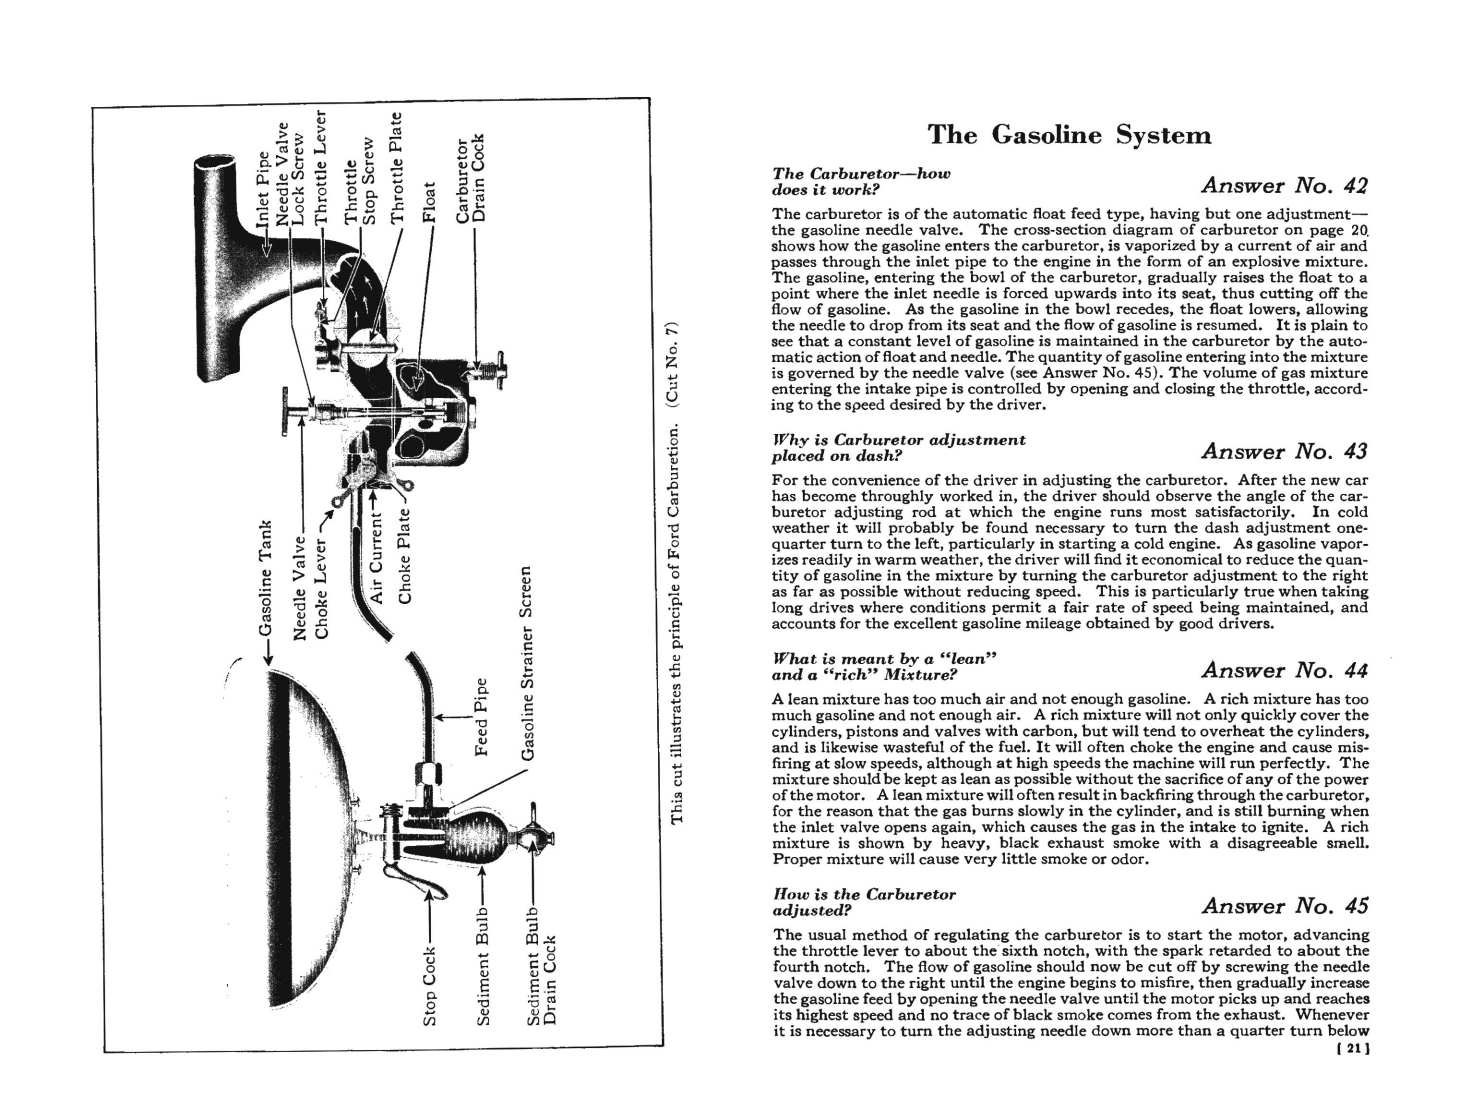 1924_Ford_Owners_Manual-20-21